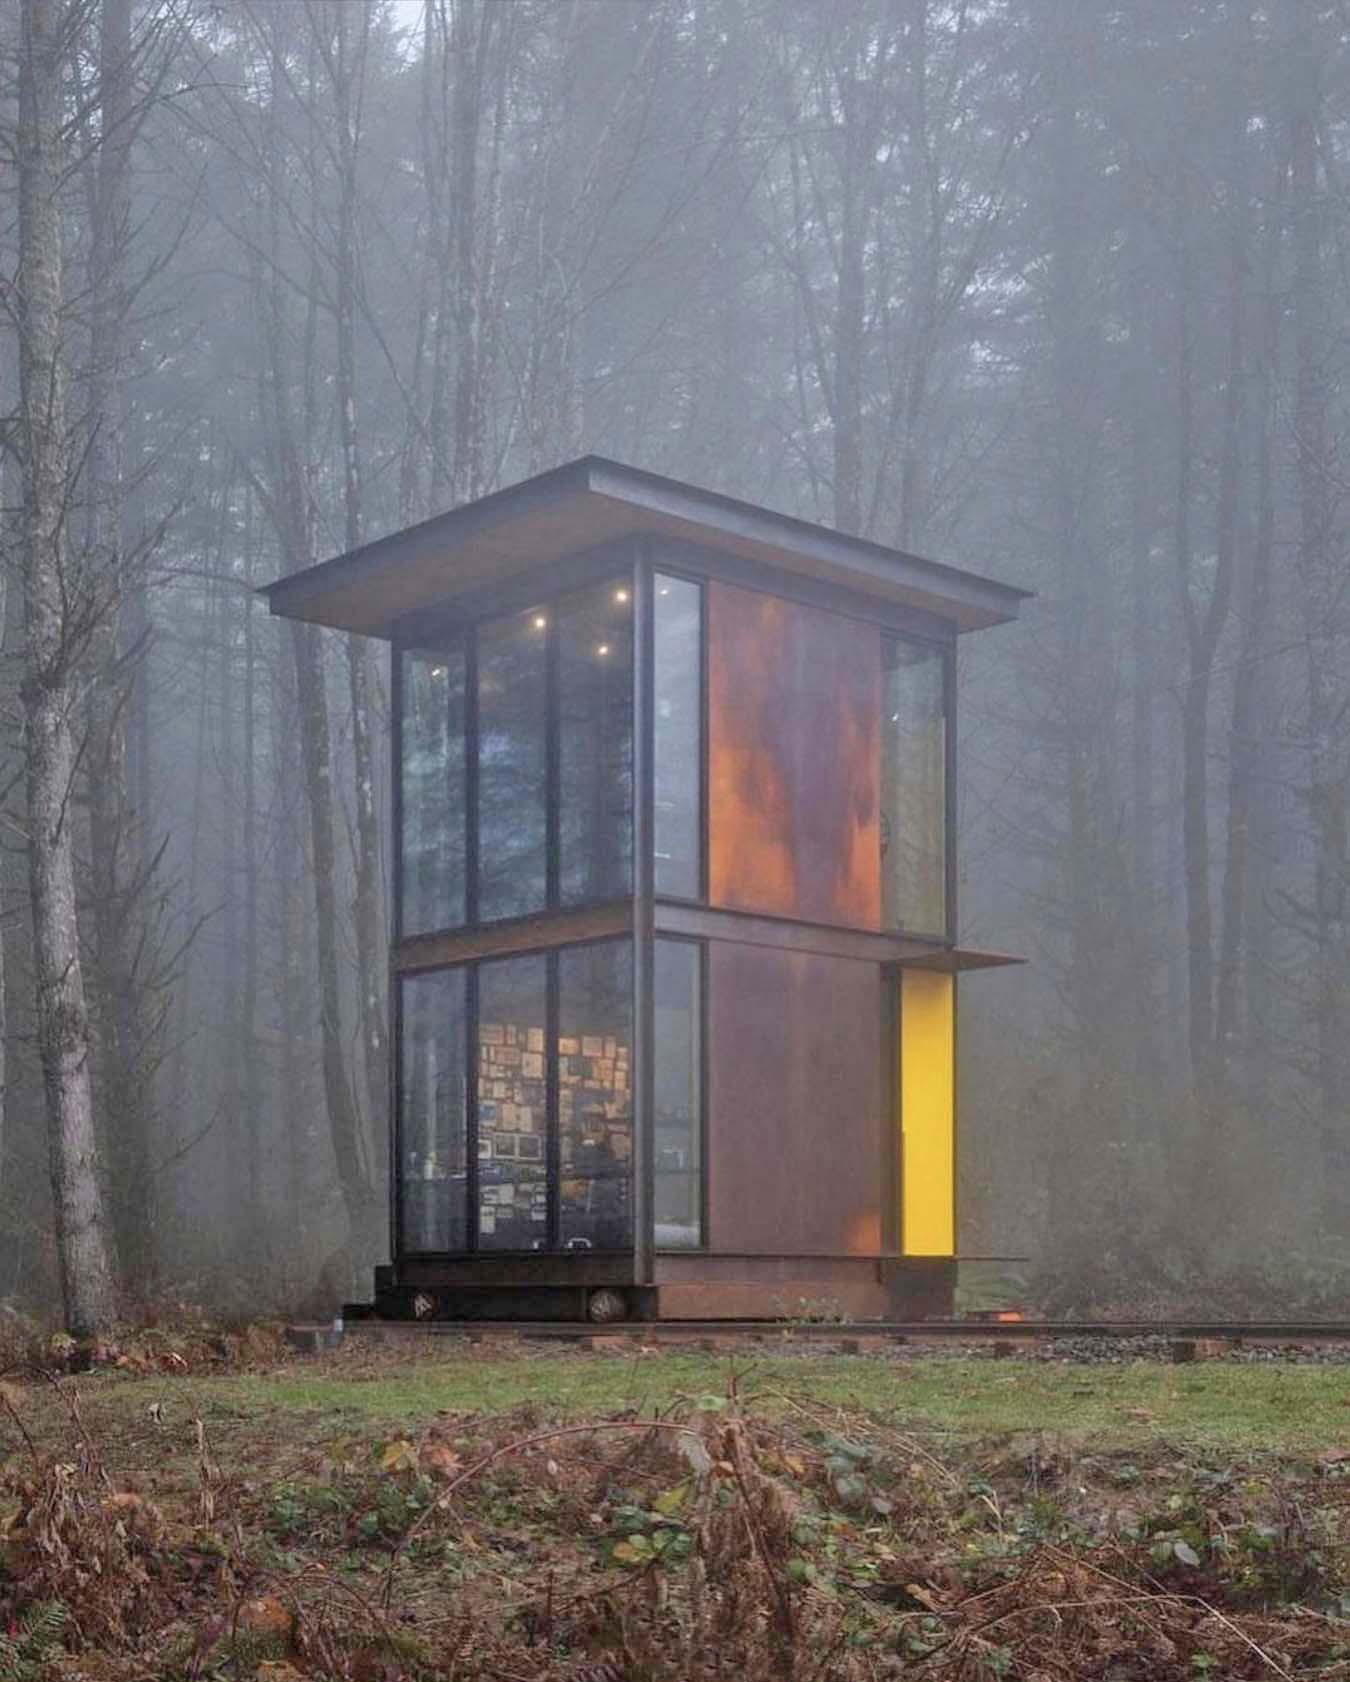 Amazing Washington forest house with a steel tower office on train tracks